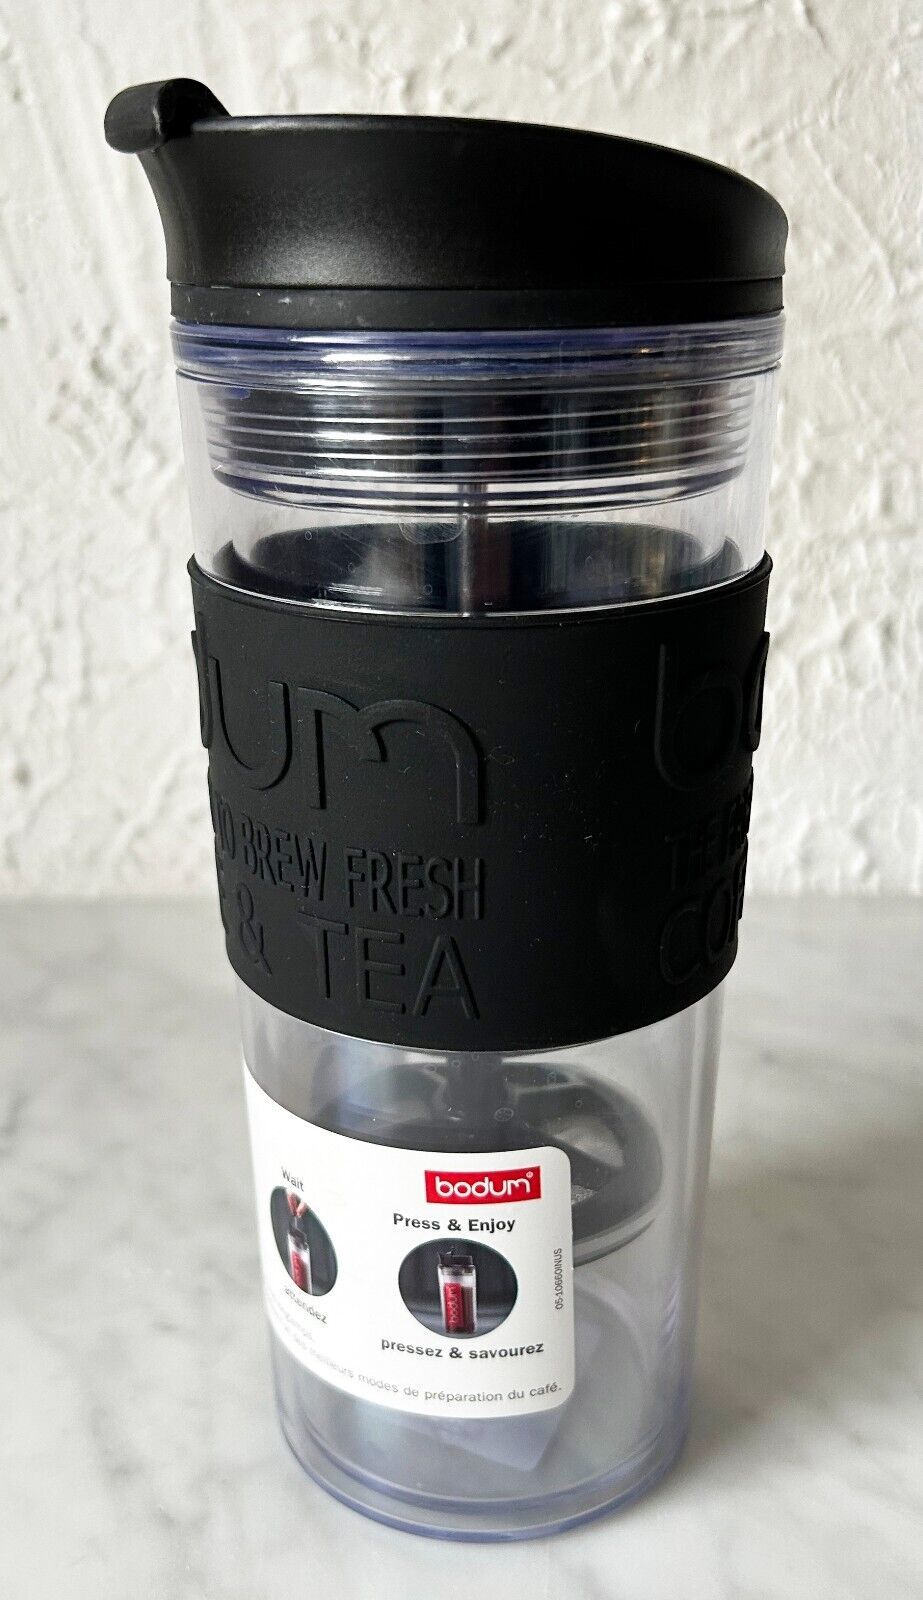 Bodum Travel Press - Insulated Tumbler with French Press Brew & Drink on the Go - $18.95